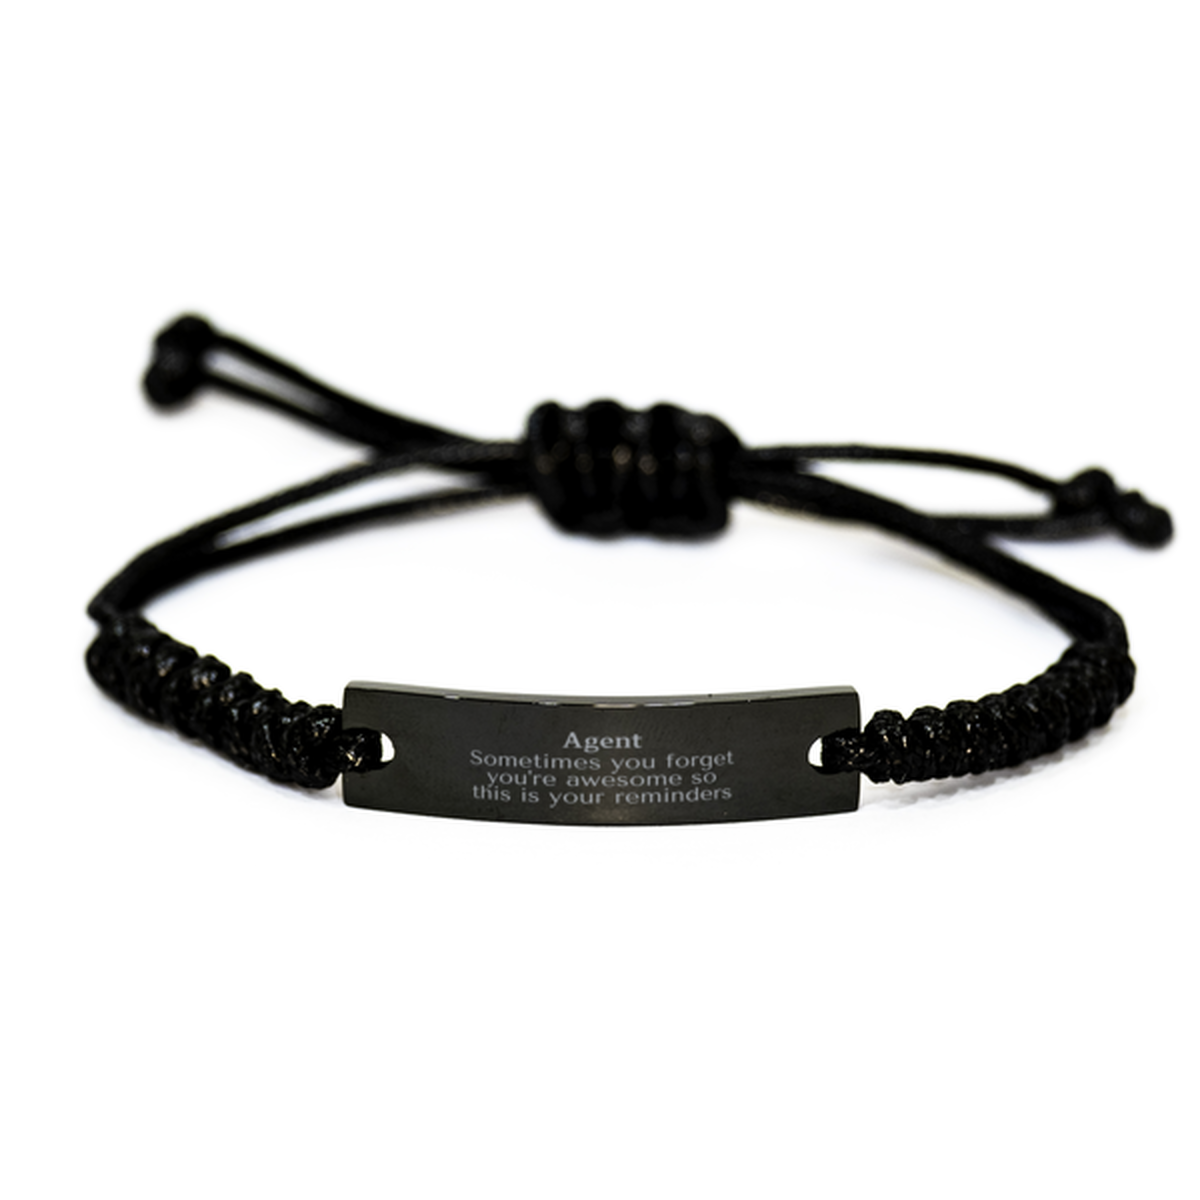 Sentimental Agent Black Rope Bracelet, Agent Sometimes you forget you're awesome so this is your reminders, Graduation Christmas Birthday Gifts for Agent, Men, Women, Coworkers